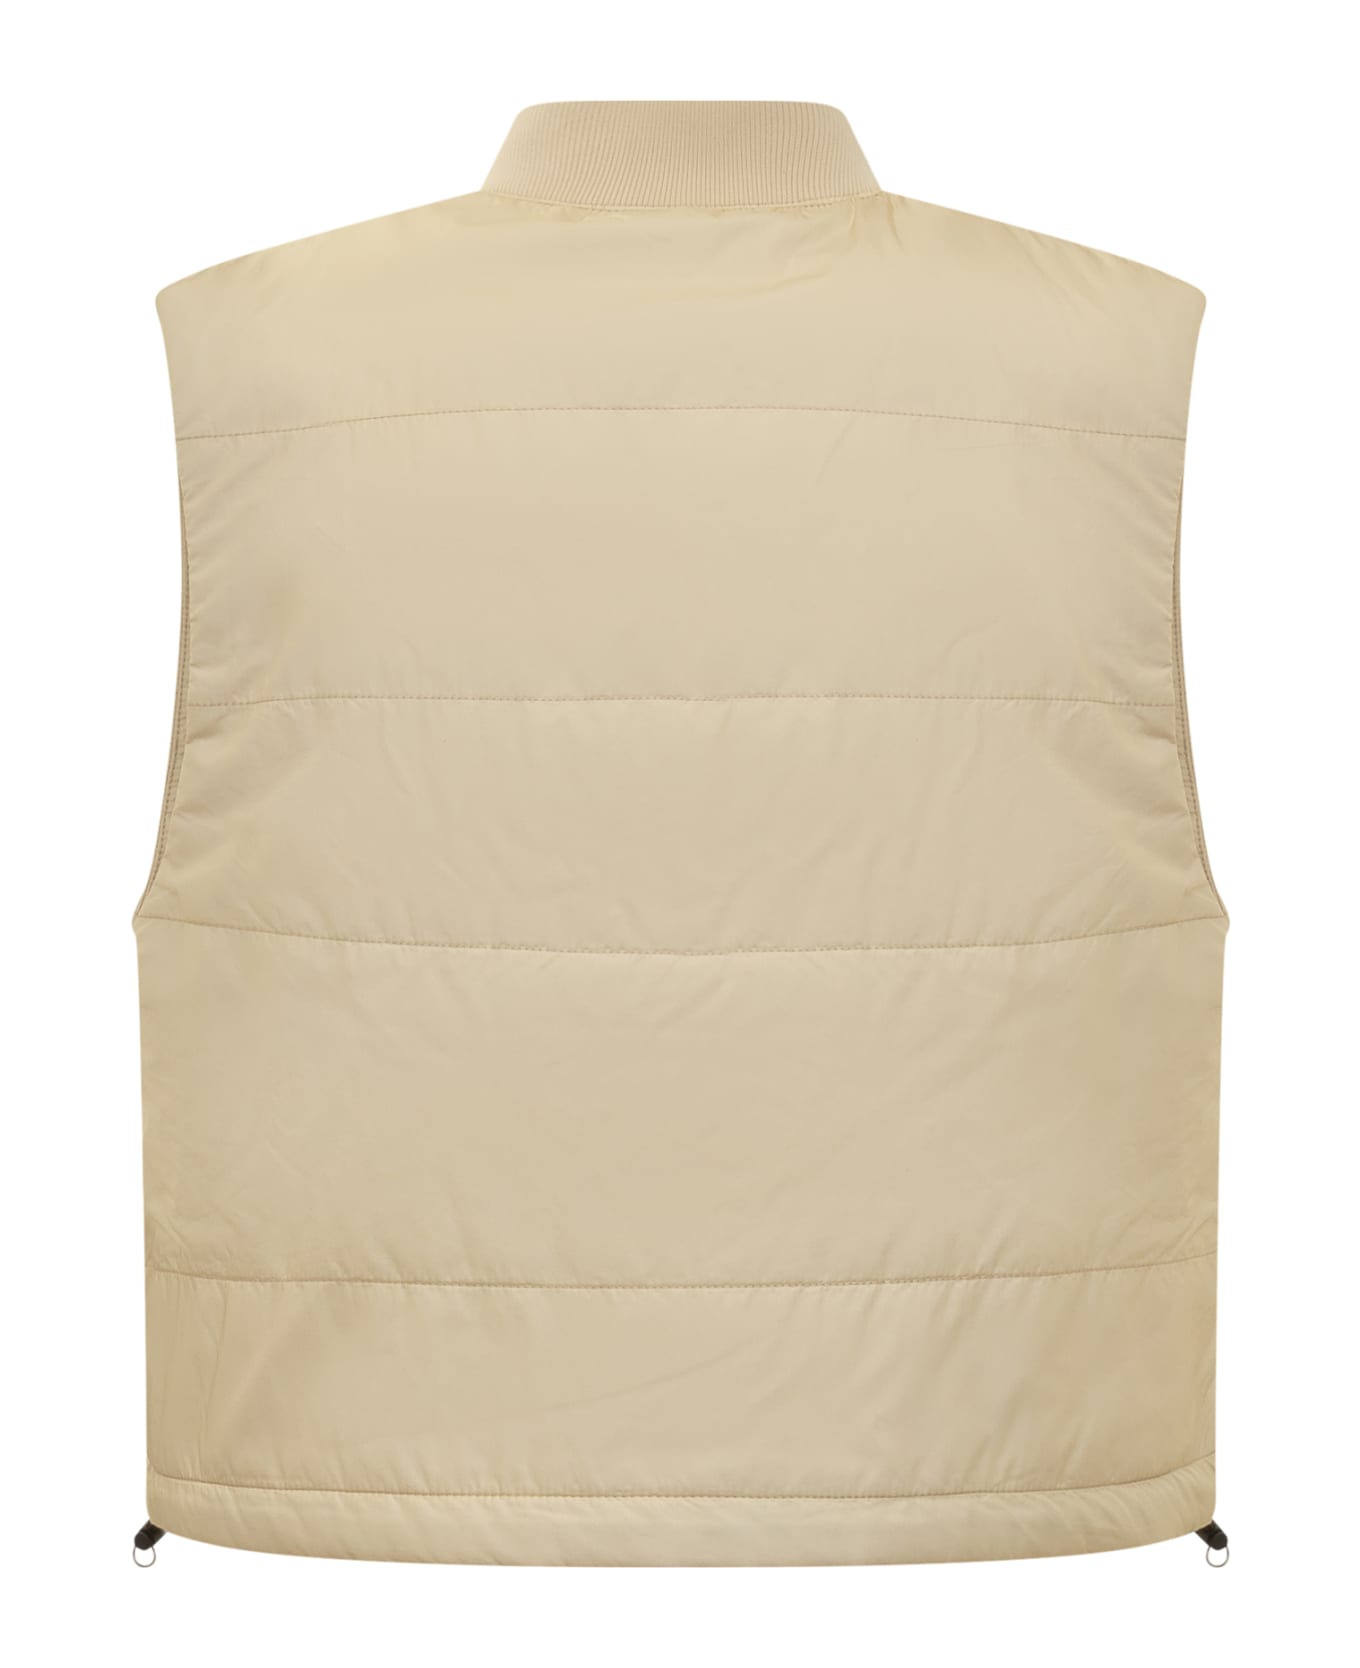 Palm Angels Padded Vest With Logo - OFF WHITE